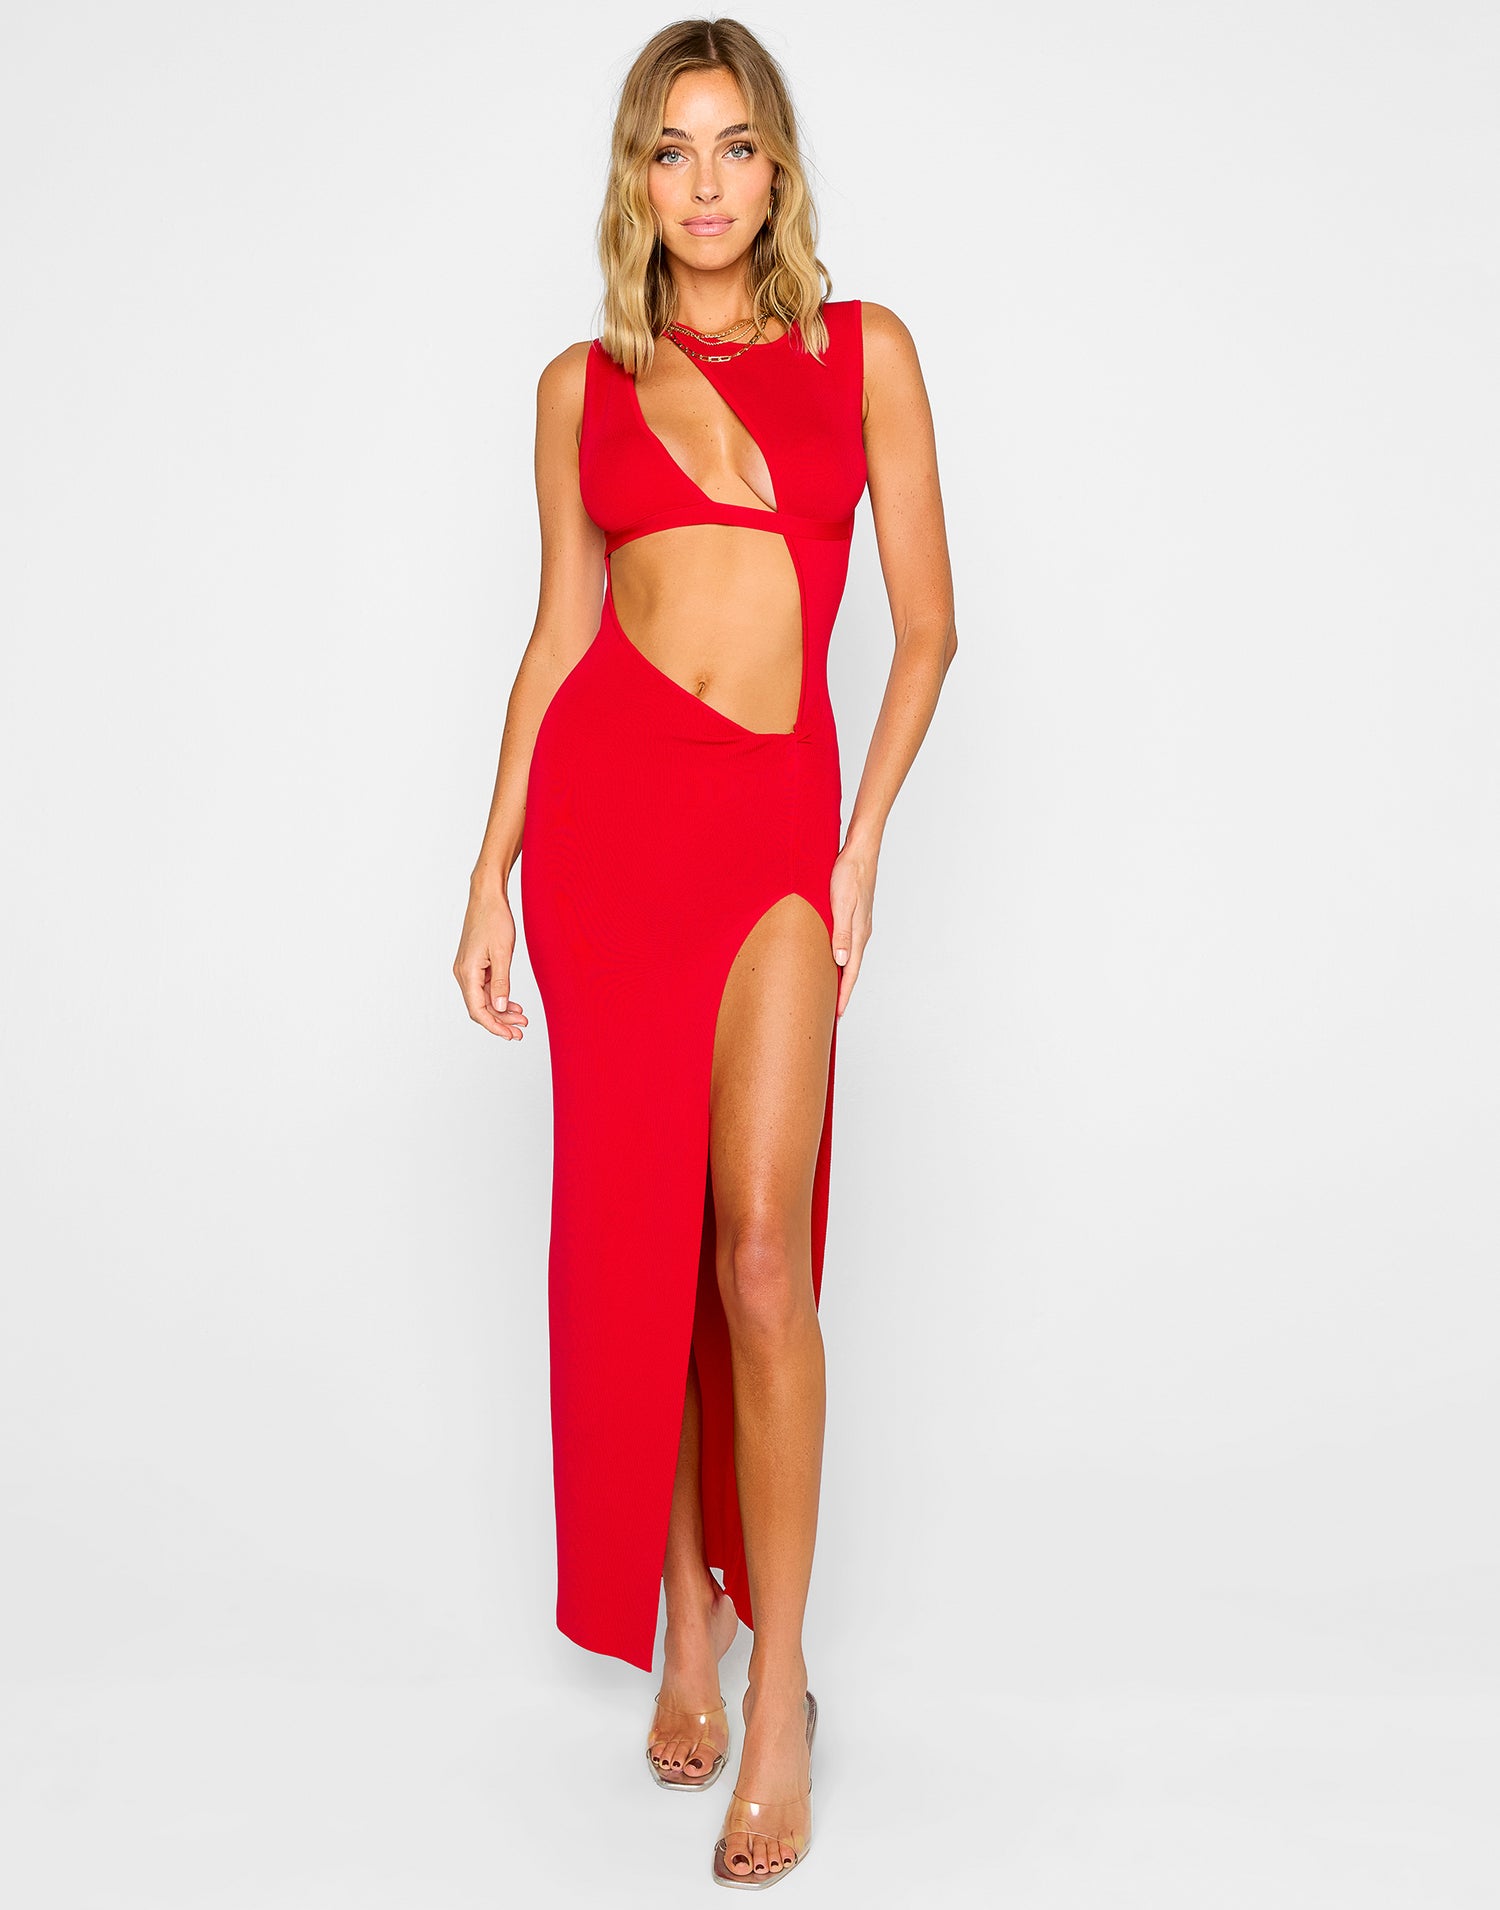 This Is It Apparel Maxi Dress by Summer Haus in Red with Sexy Cutouts & High Leg Slit - Alternate Front View